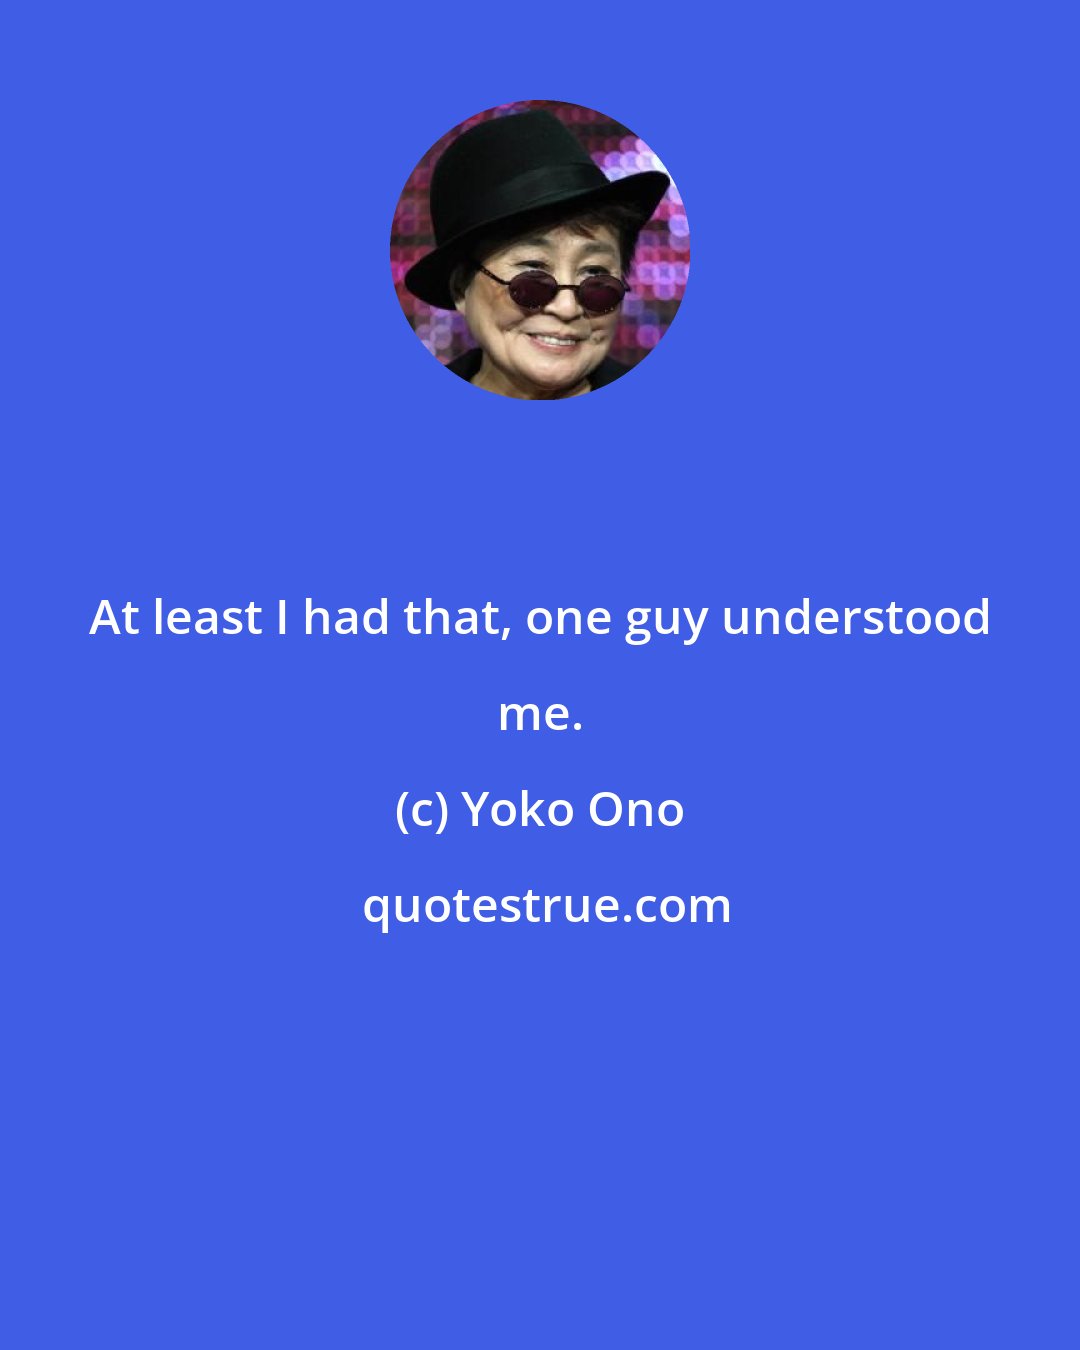 Yoko Ono: At least I had that, one guy understood me.